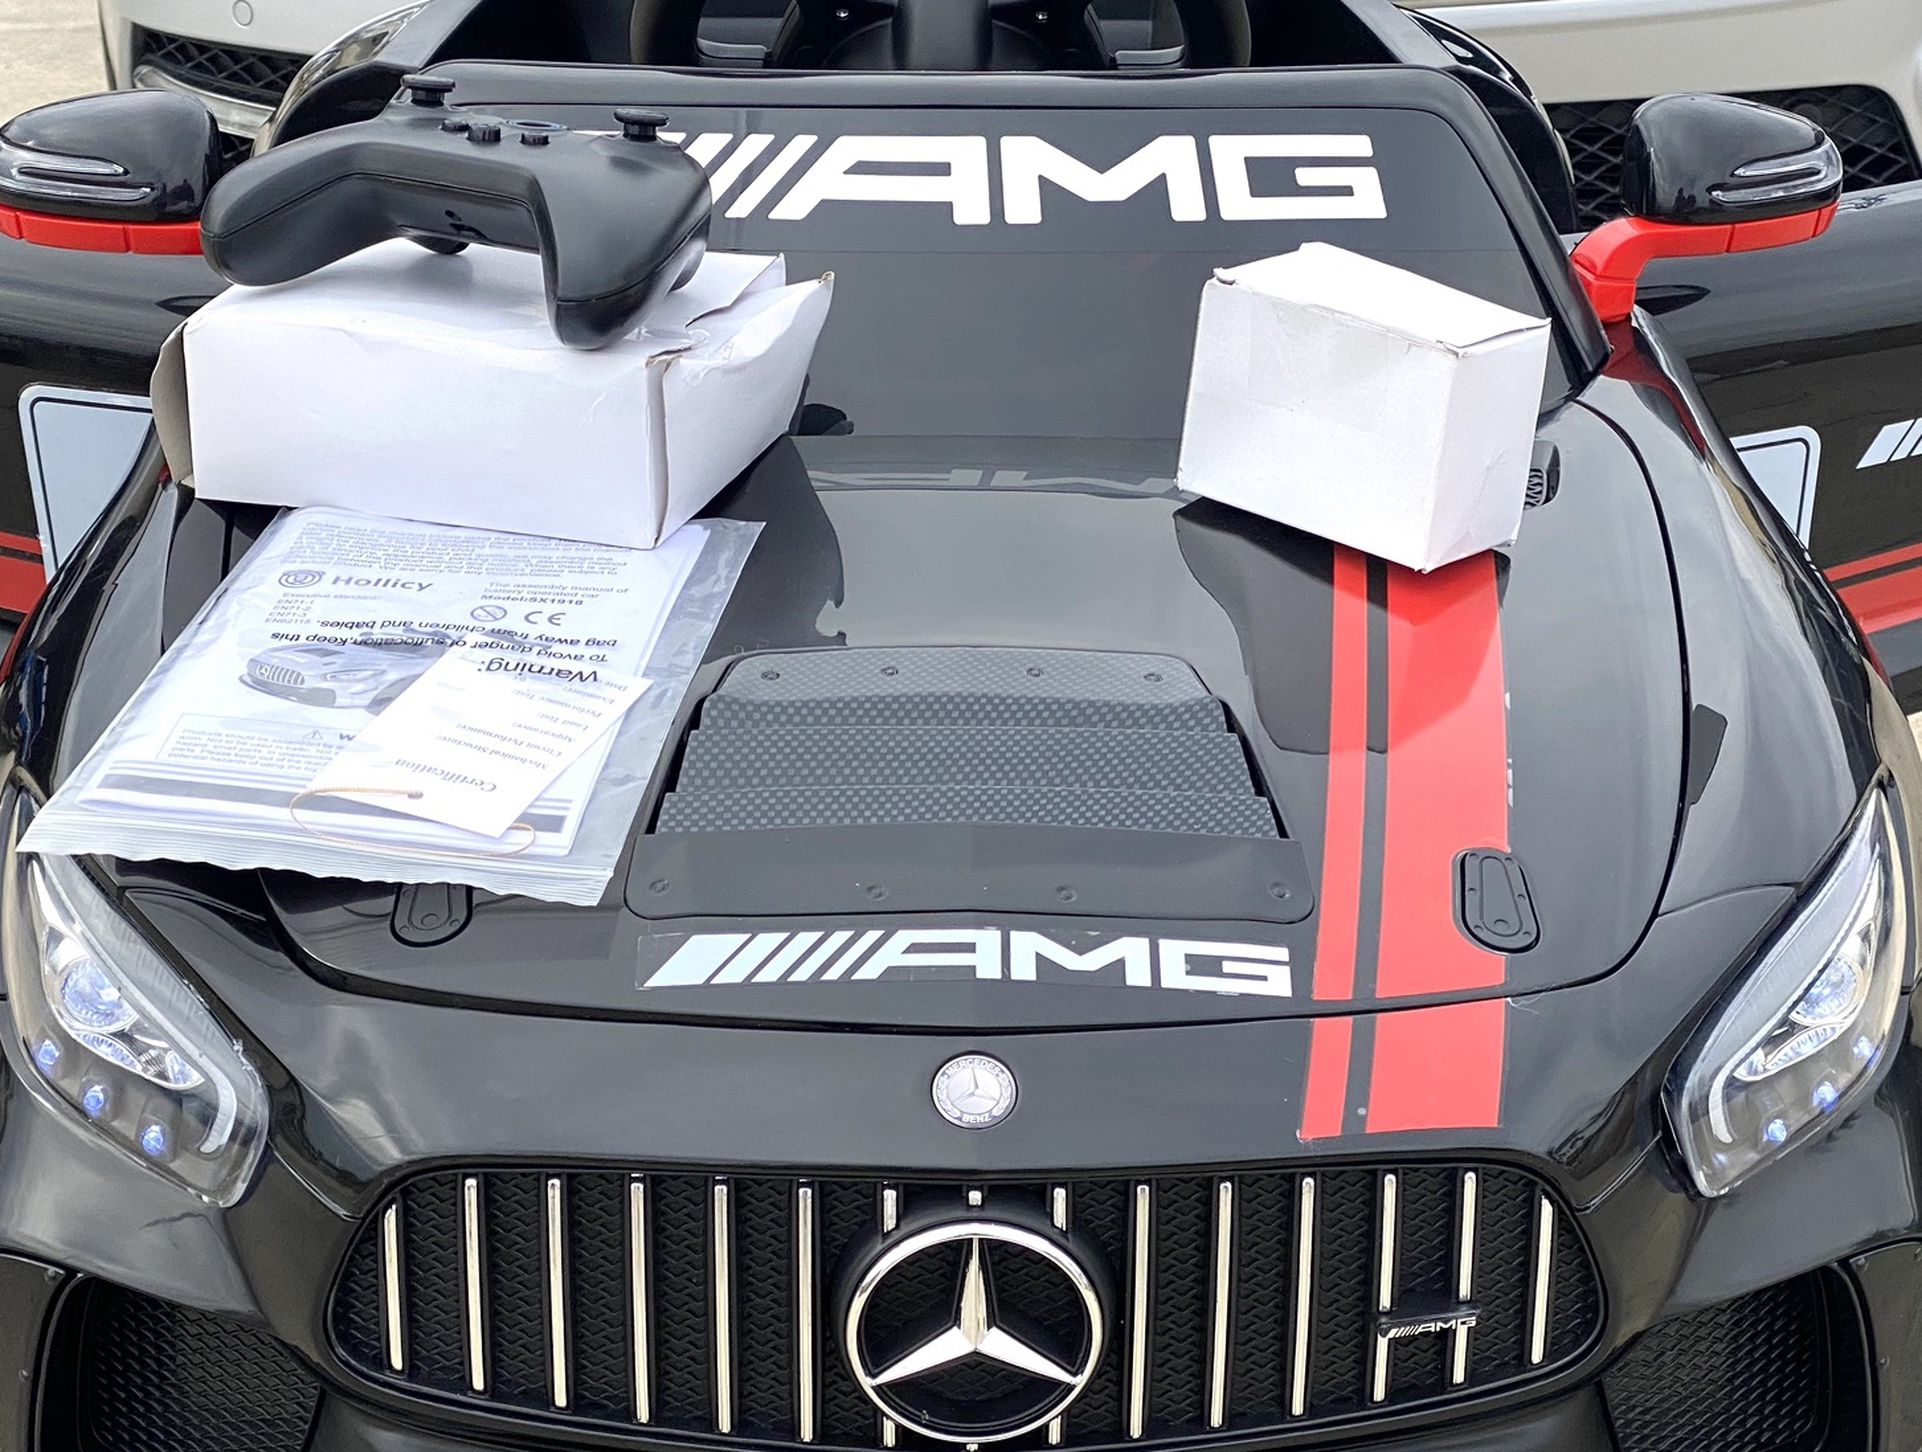 BRAND NEW Mercedes Benz AMG GT-4 12volt REMOTE CONTROL MODEL Electric Kid Ride On Car Power Wheels